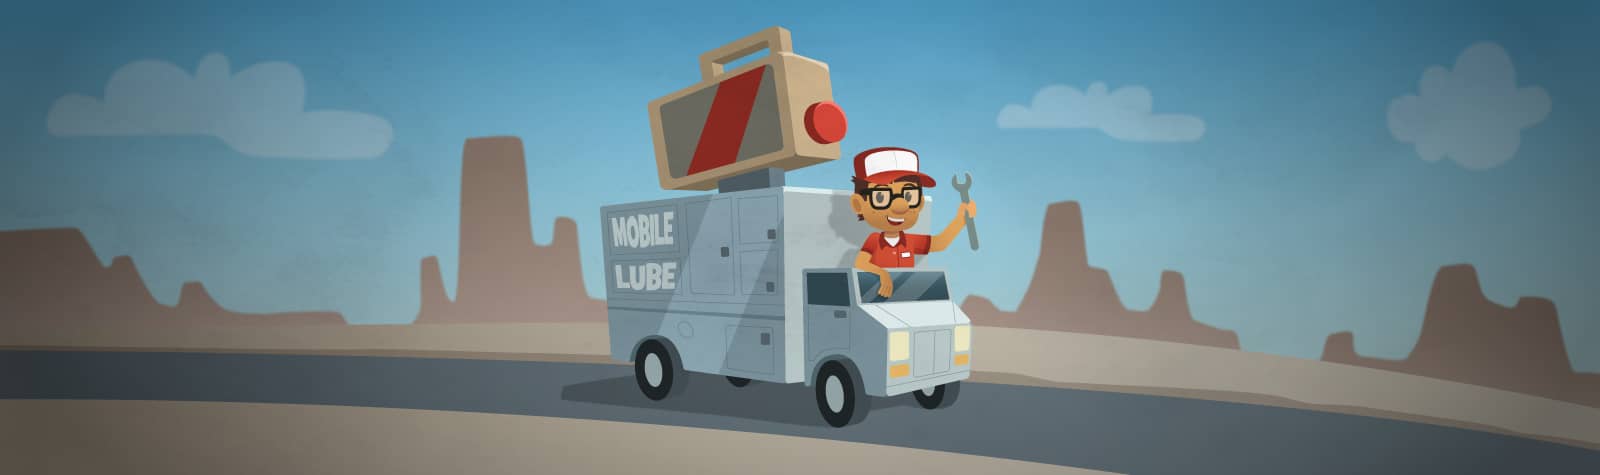 Mobile Lube Oil Business: Extending Your Services